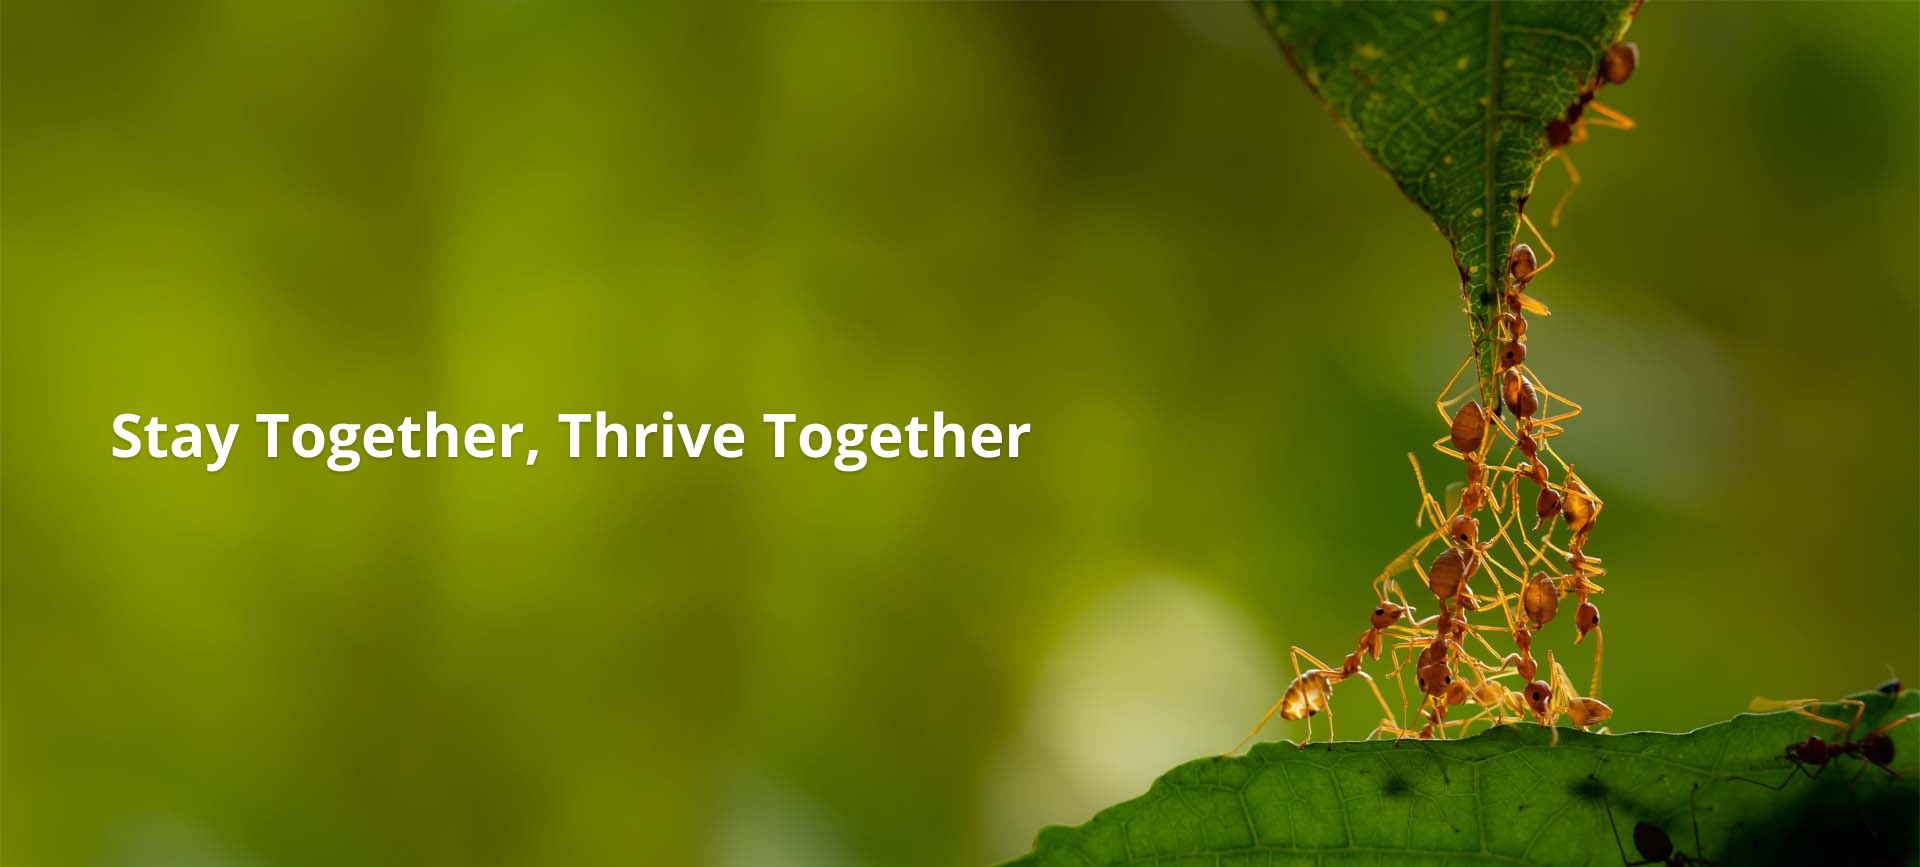 Stay Together, Thrive Together